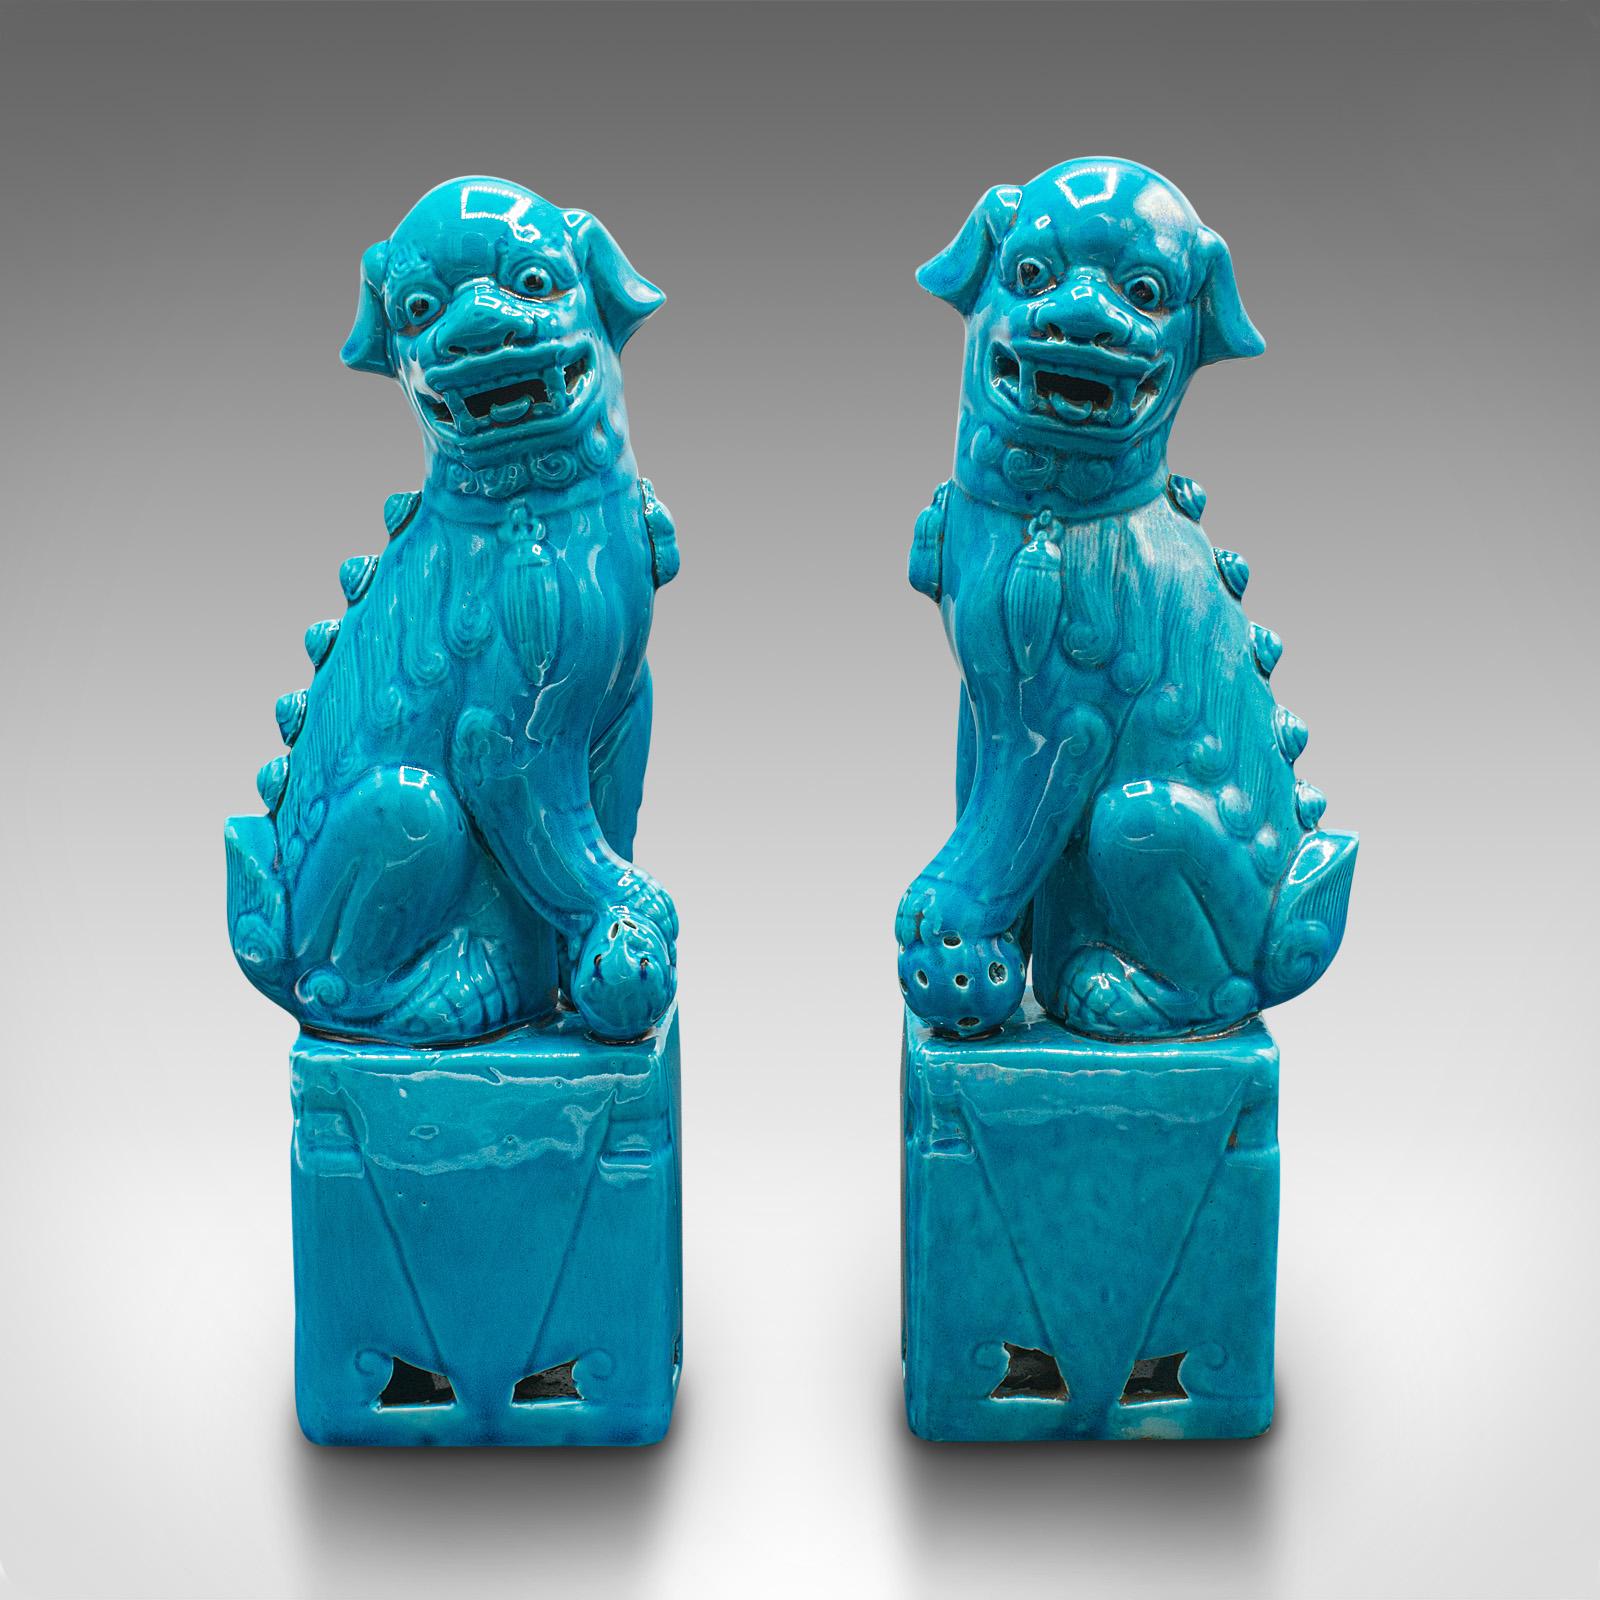 This is a pair of vintage dog statues. An Oriental, ceramic decorative 'Dog of Fo' ornament dating to the late Art Deco period, circa 1940.

Captivatingly blue dogs with fine finish and appearance
Displaying a desirable aged patina and in good